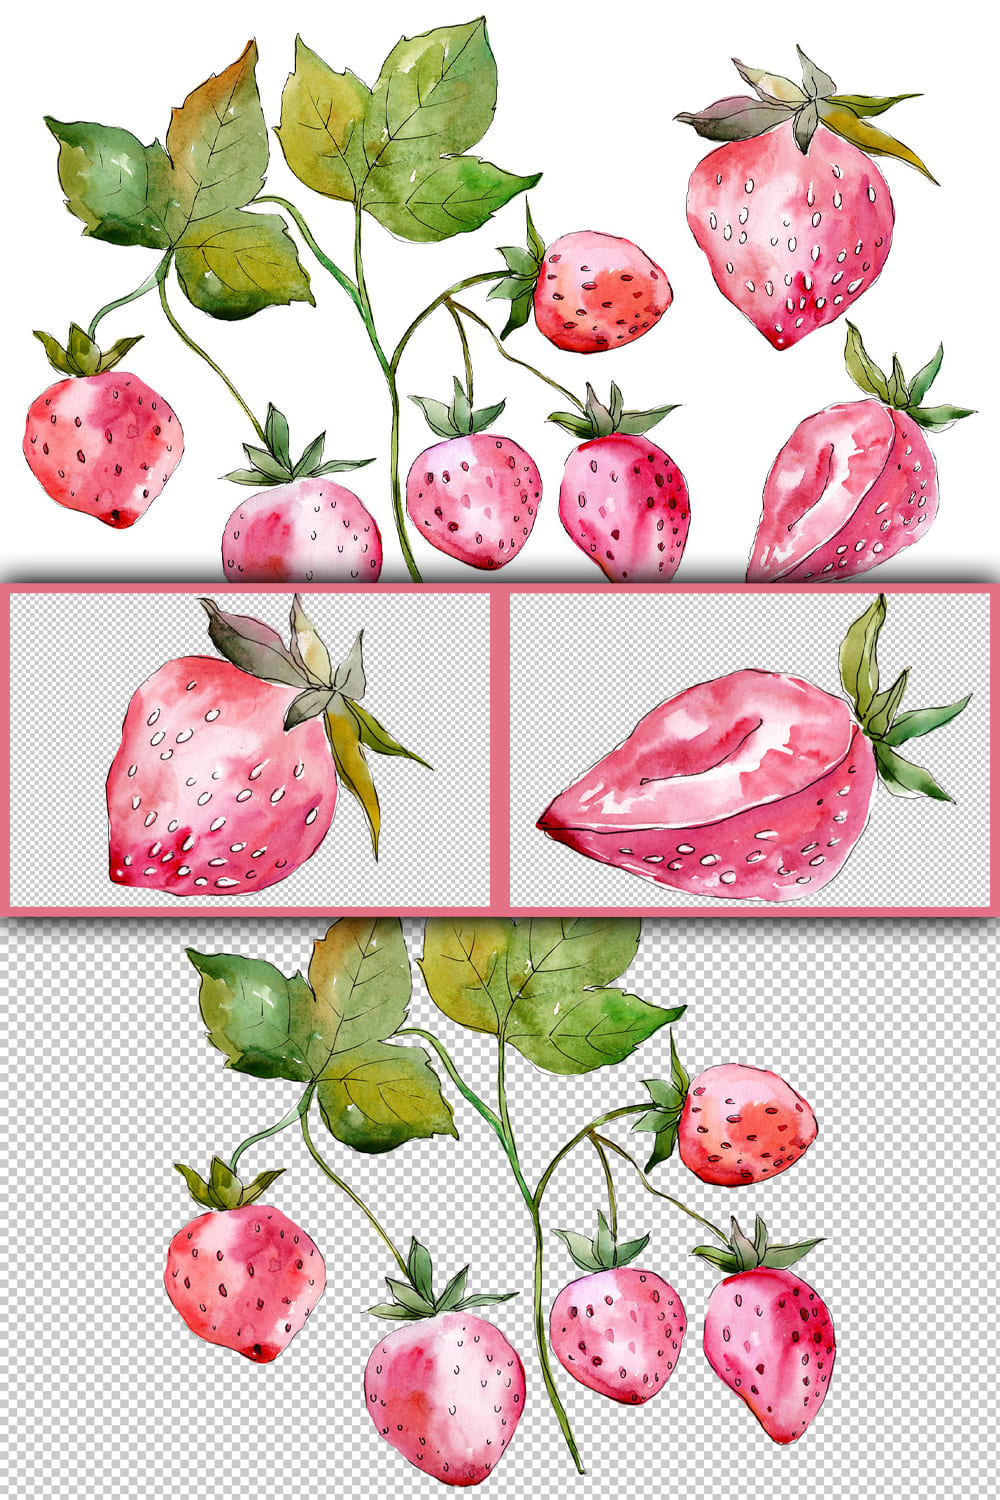 277783 strawberry red watercolor png pinterest 1000 1500 493